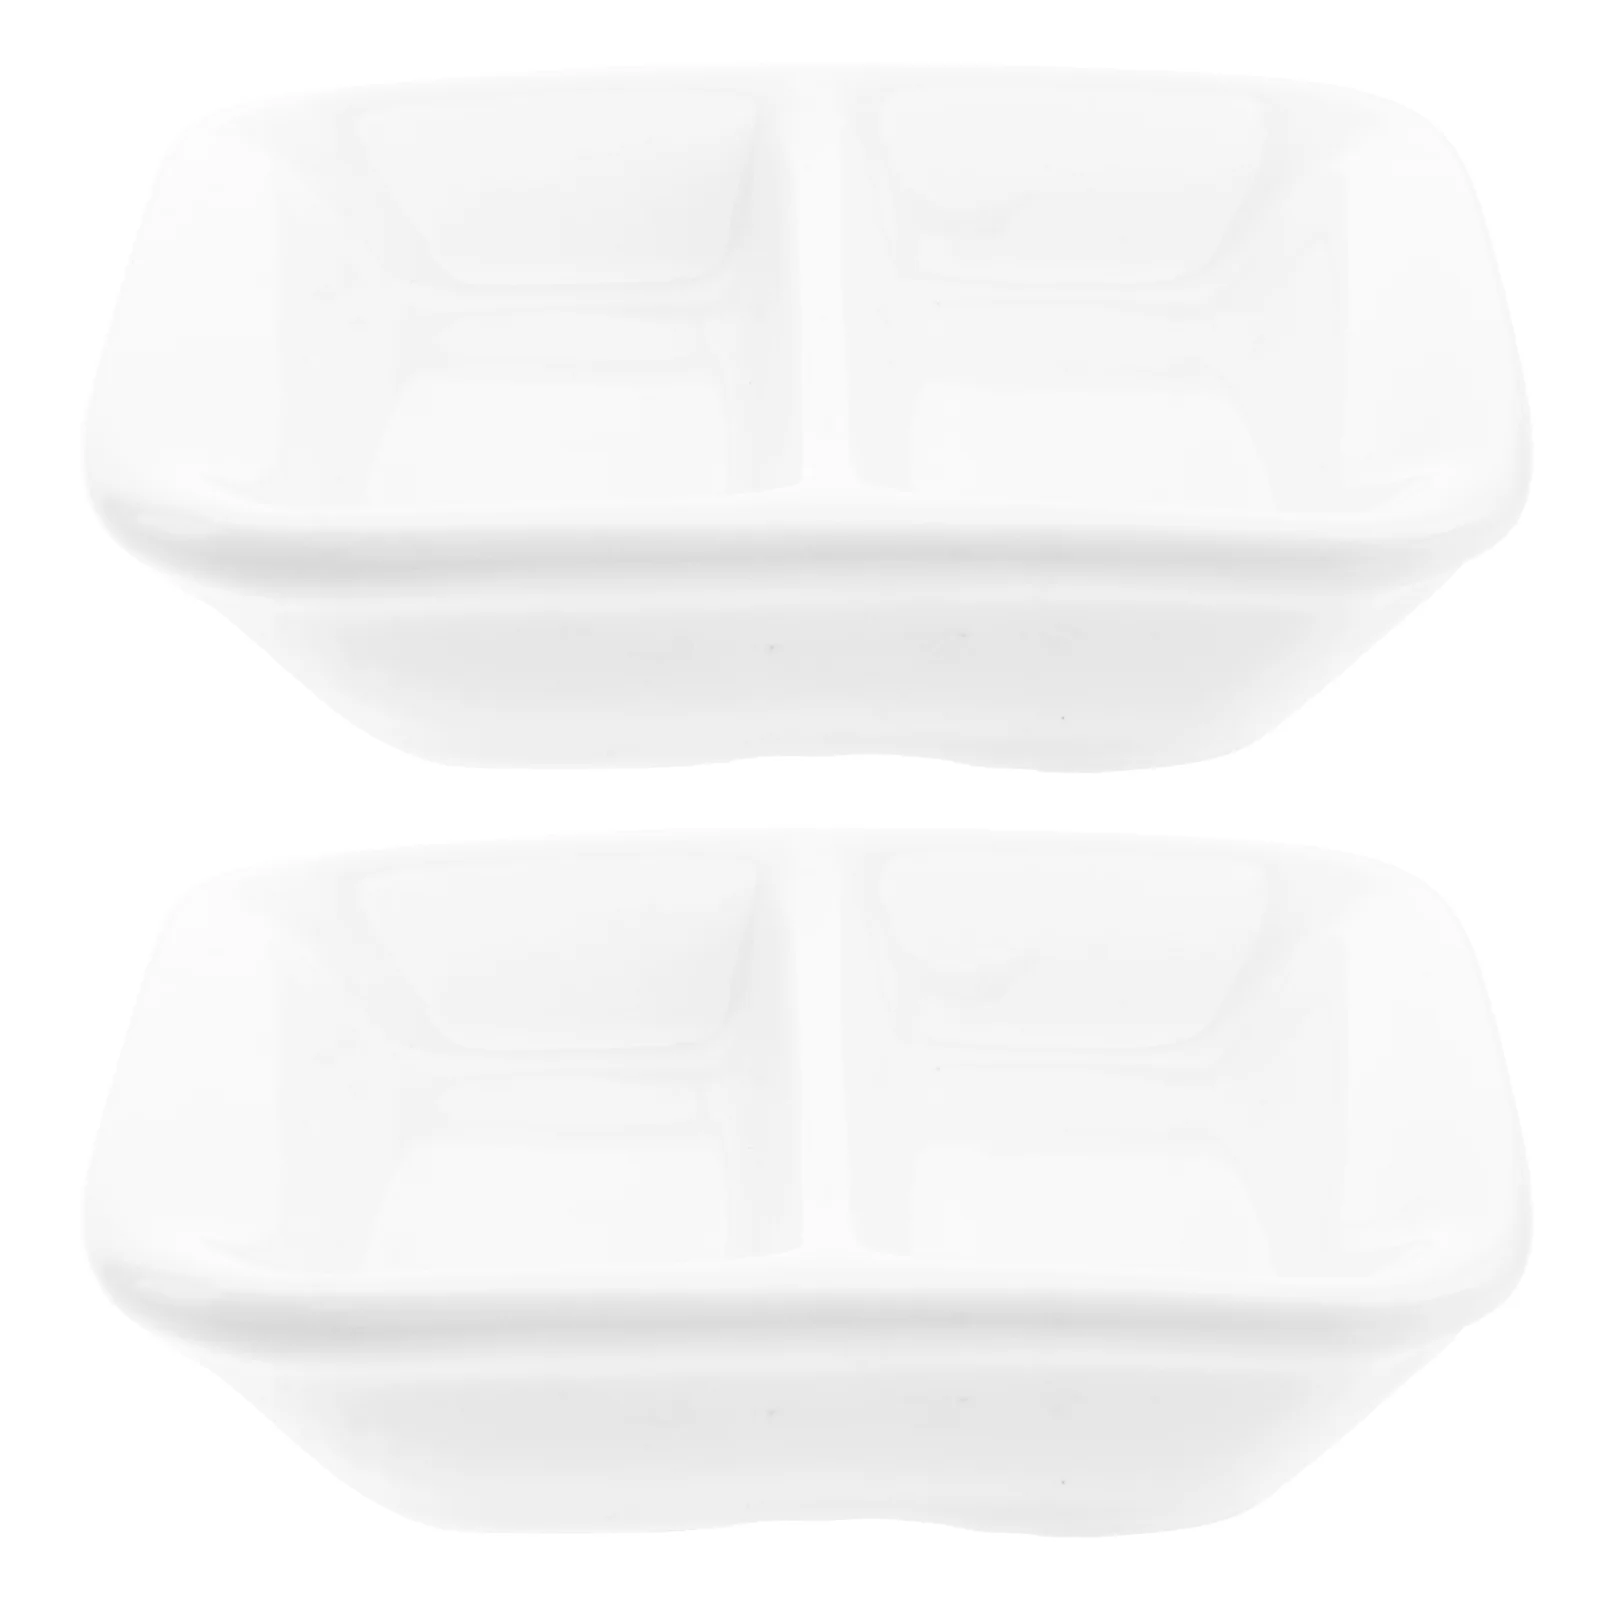 

Sauce Tray Serving Dishes Dipping Dish Appetizer Divided Soy Bowl Bowls Plates Snack Condiment Platter Ceramic Compartment